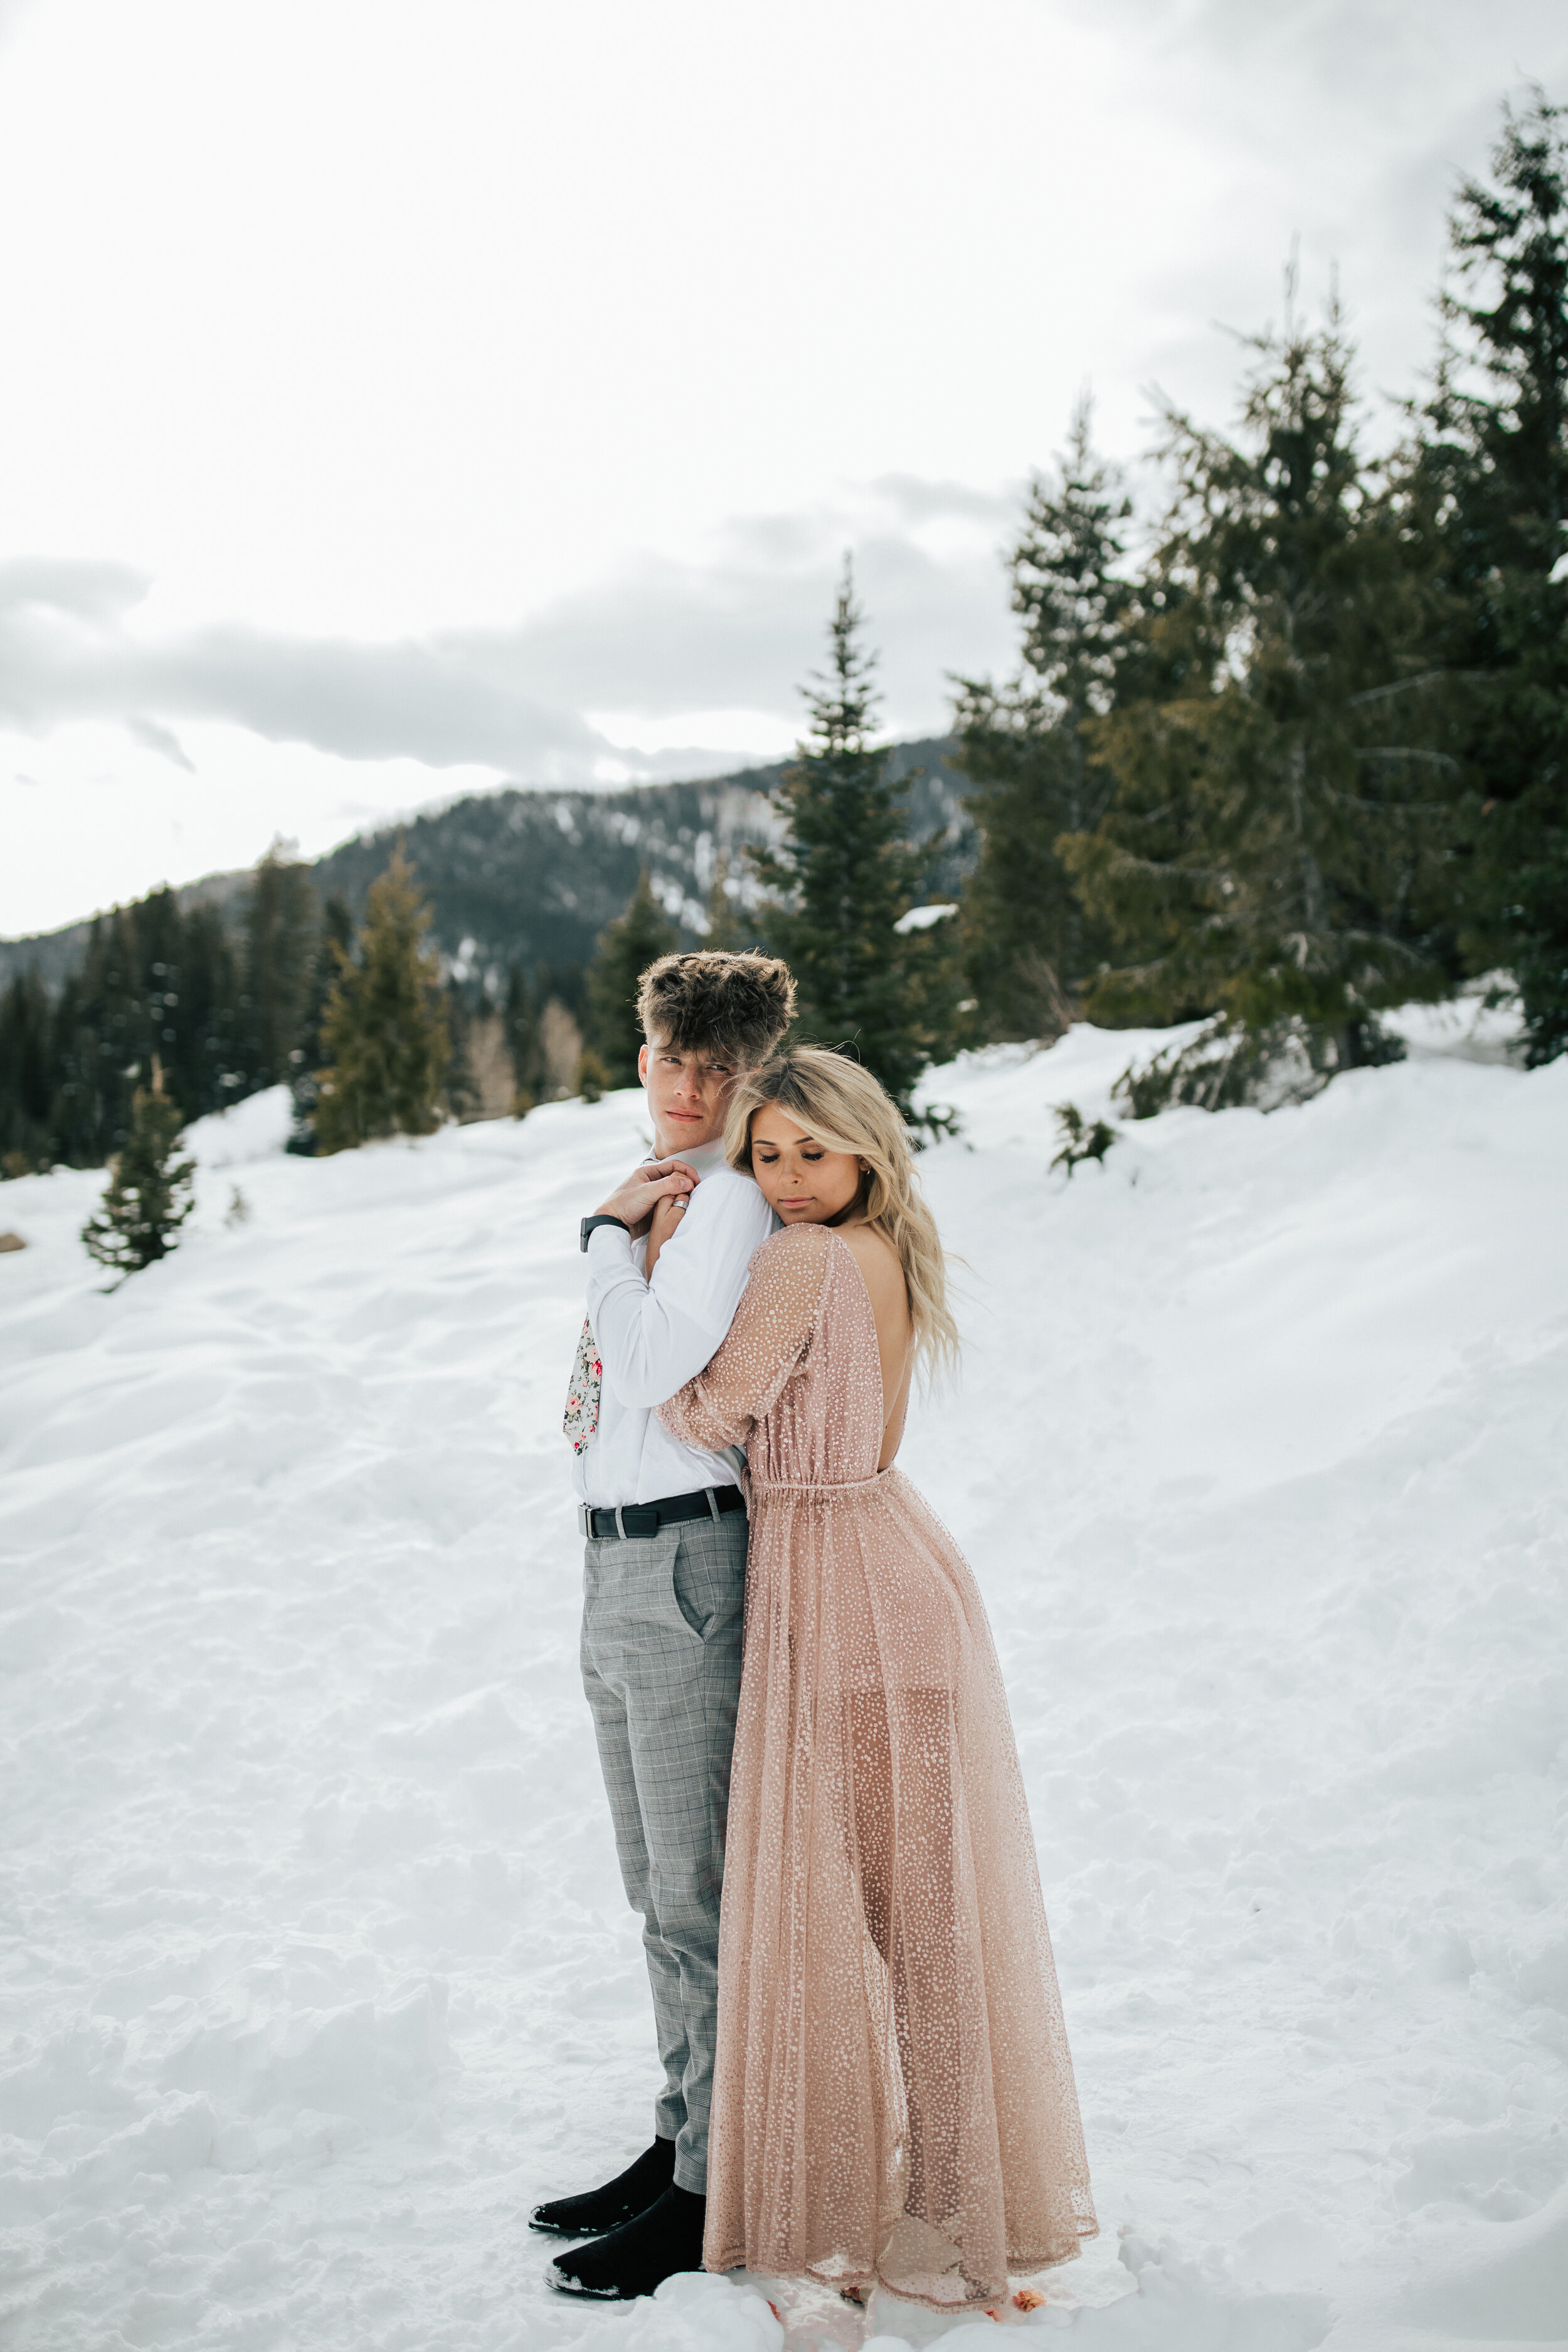  Darling woman snuggles behind her groom in a winter wonderland scene in the Utah Mountains wearing a pink sheer dress by Elopement Photographer Emily Jenkins Photography. snowy bridal photography elopement photographer winter couple photography #emi